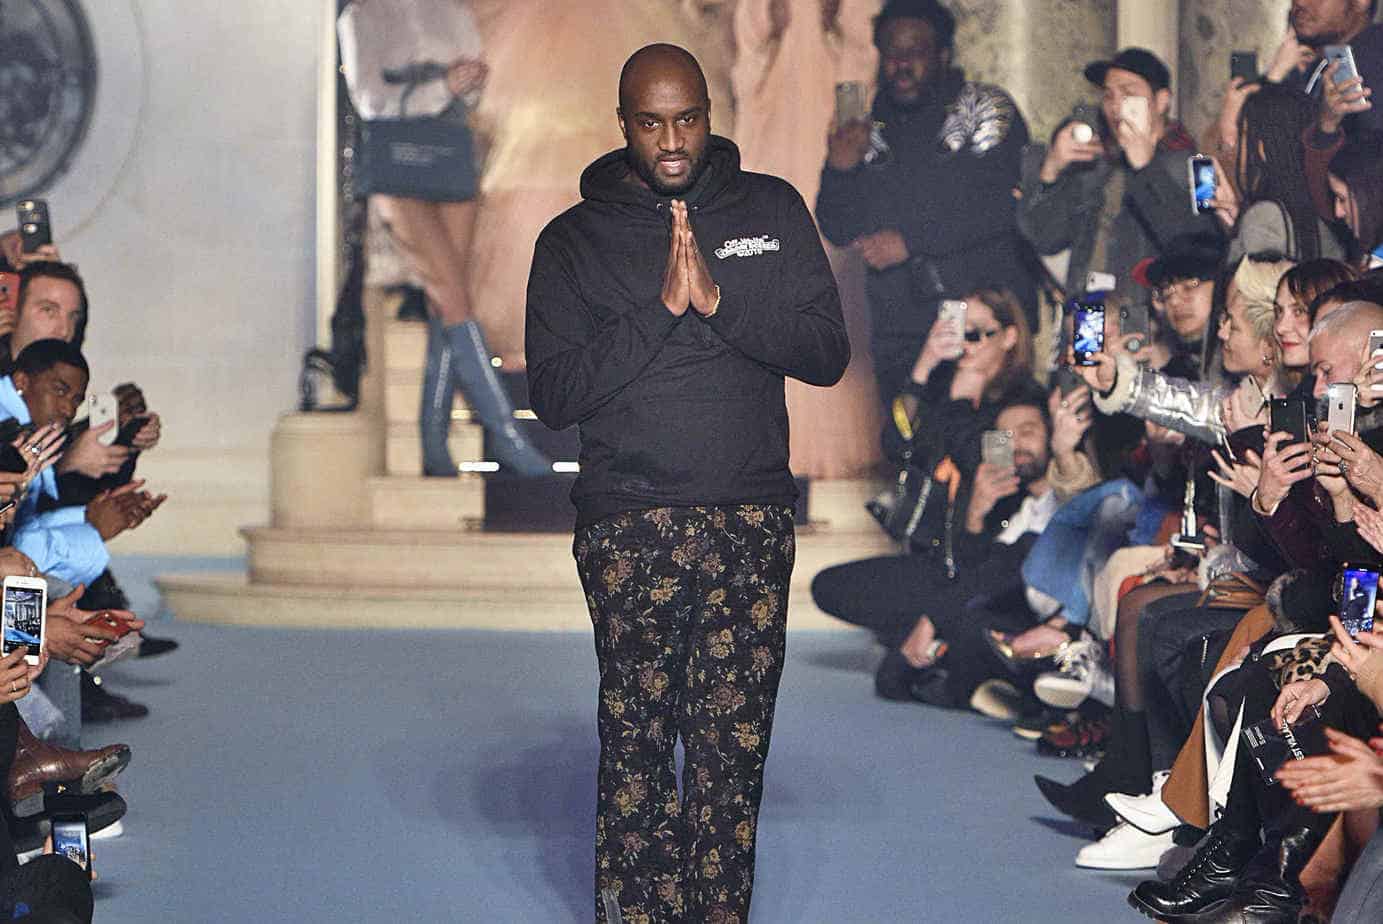 Virgil Abloh Confirms His Louis Vuitton Designs are Not Bibs or Harnesses